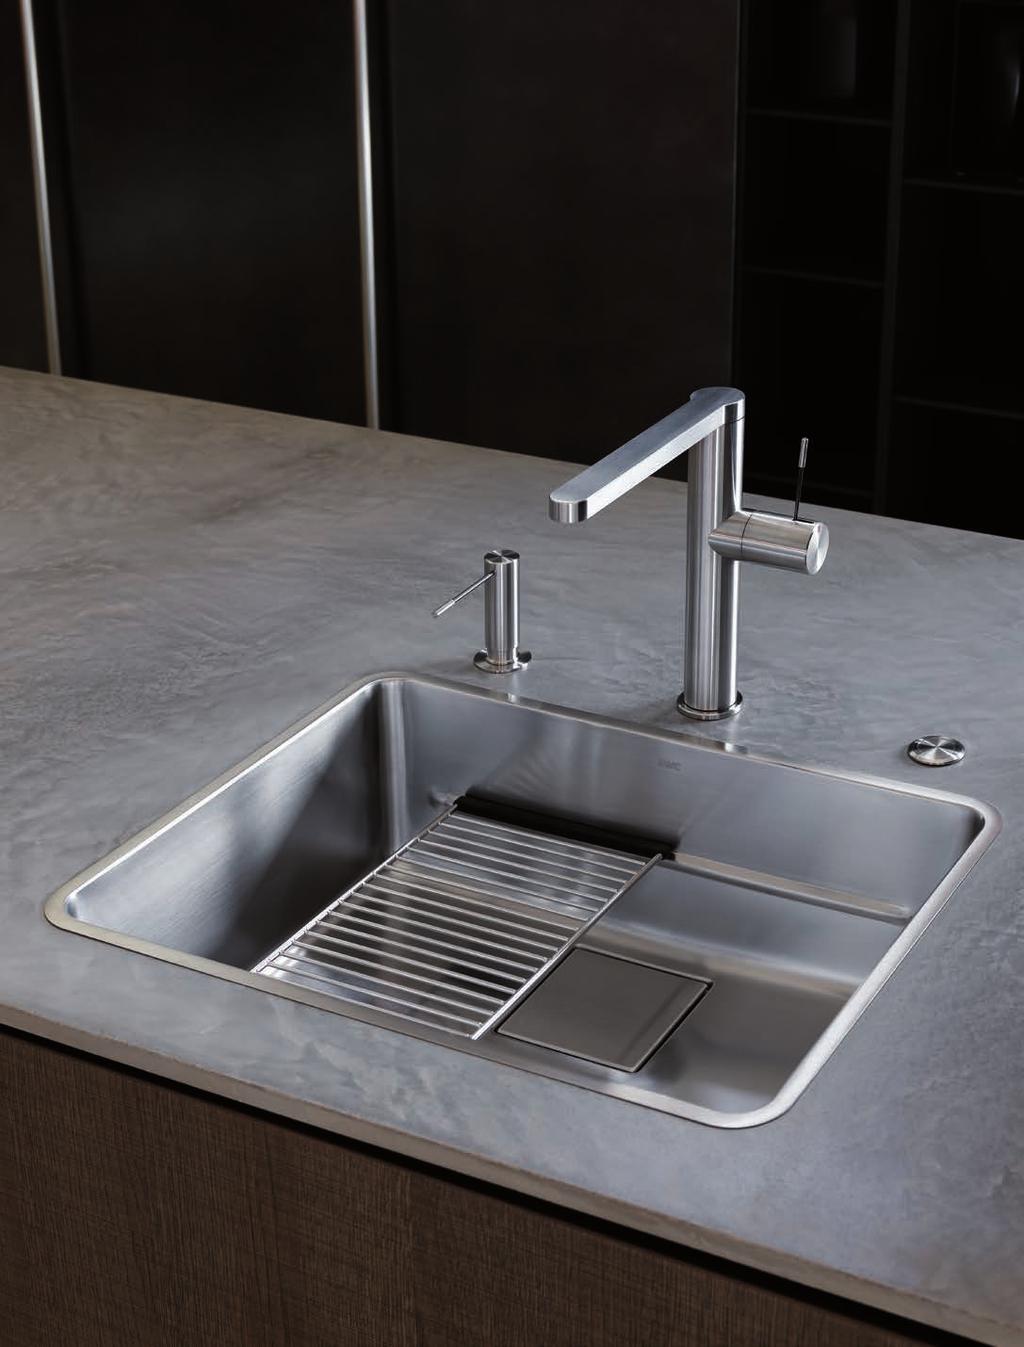 LIKE JAZZ & SUNDAYS FUNCTIONALITY KWC ONO faucets and sinks have original and functional product qualities.